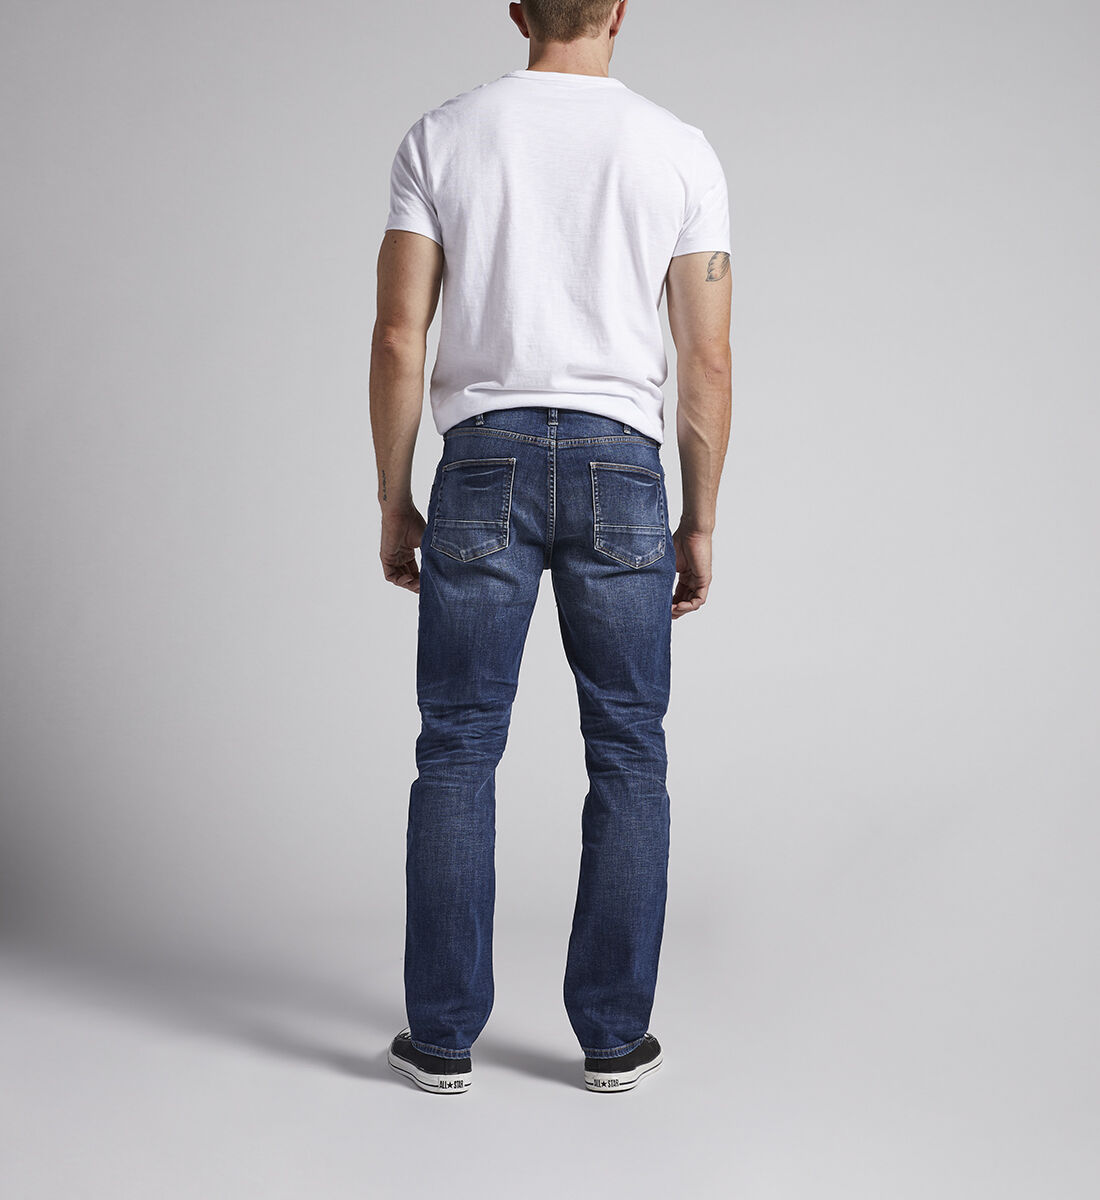 Men's Jeans - Slim Jeans, Straight Jeans, Bootcut Jeans & More 